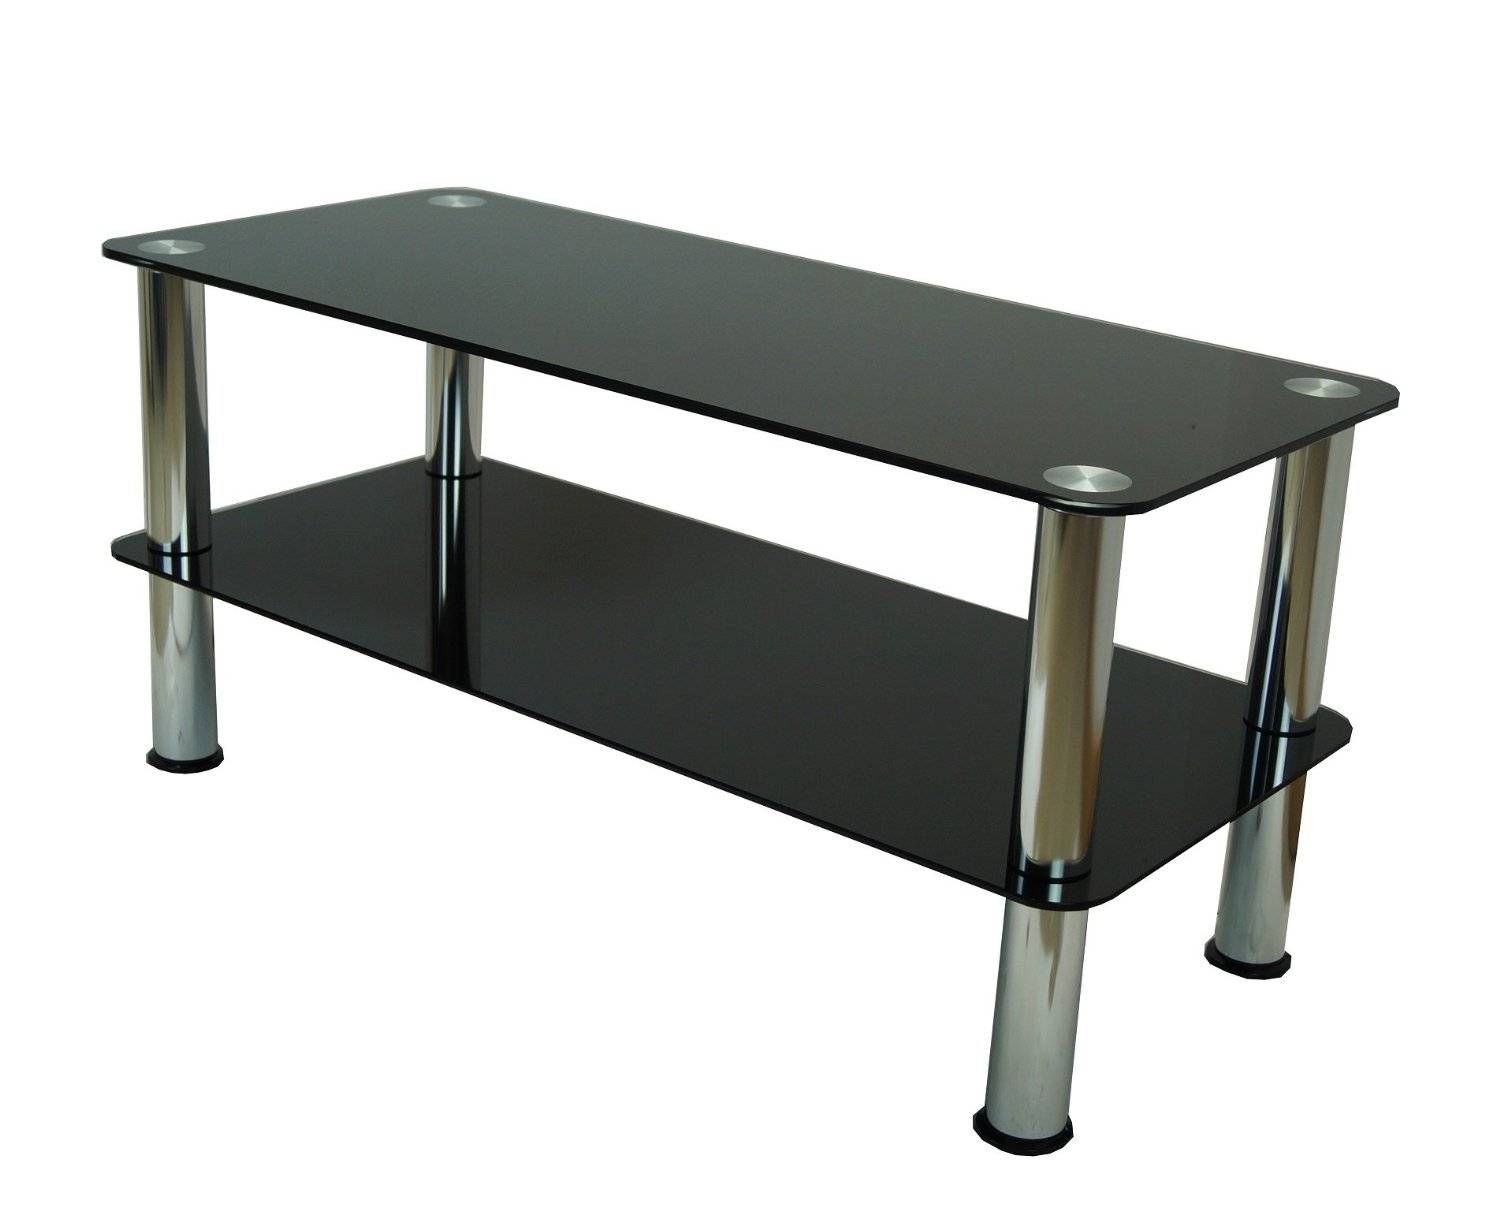 Black Glass Coffee Table With Chrome Legs | Coffee Tables Decoration With Regard To Glass Chrome Coffee Tables (View 20 of 30)